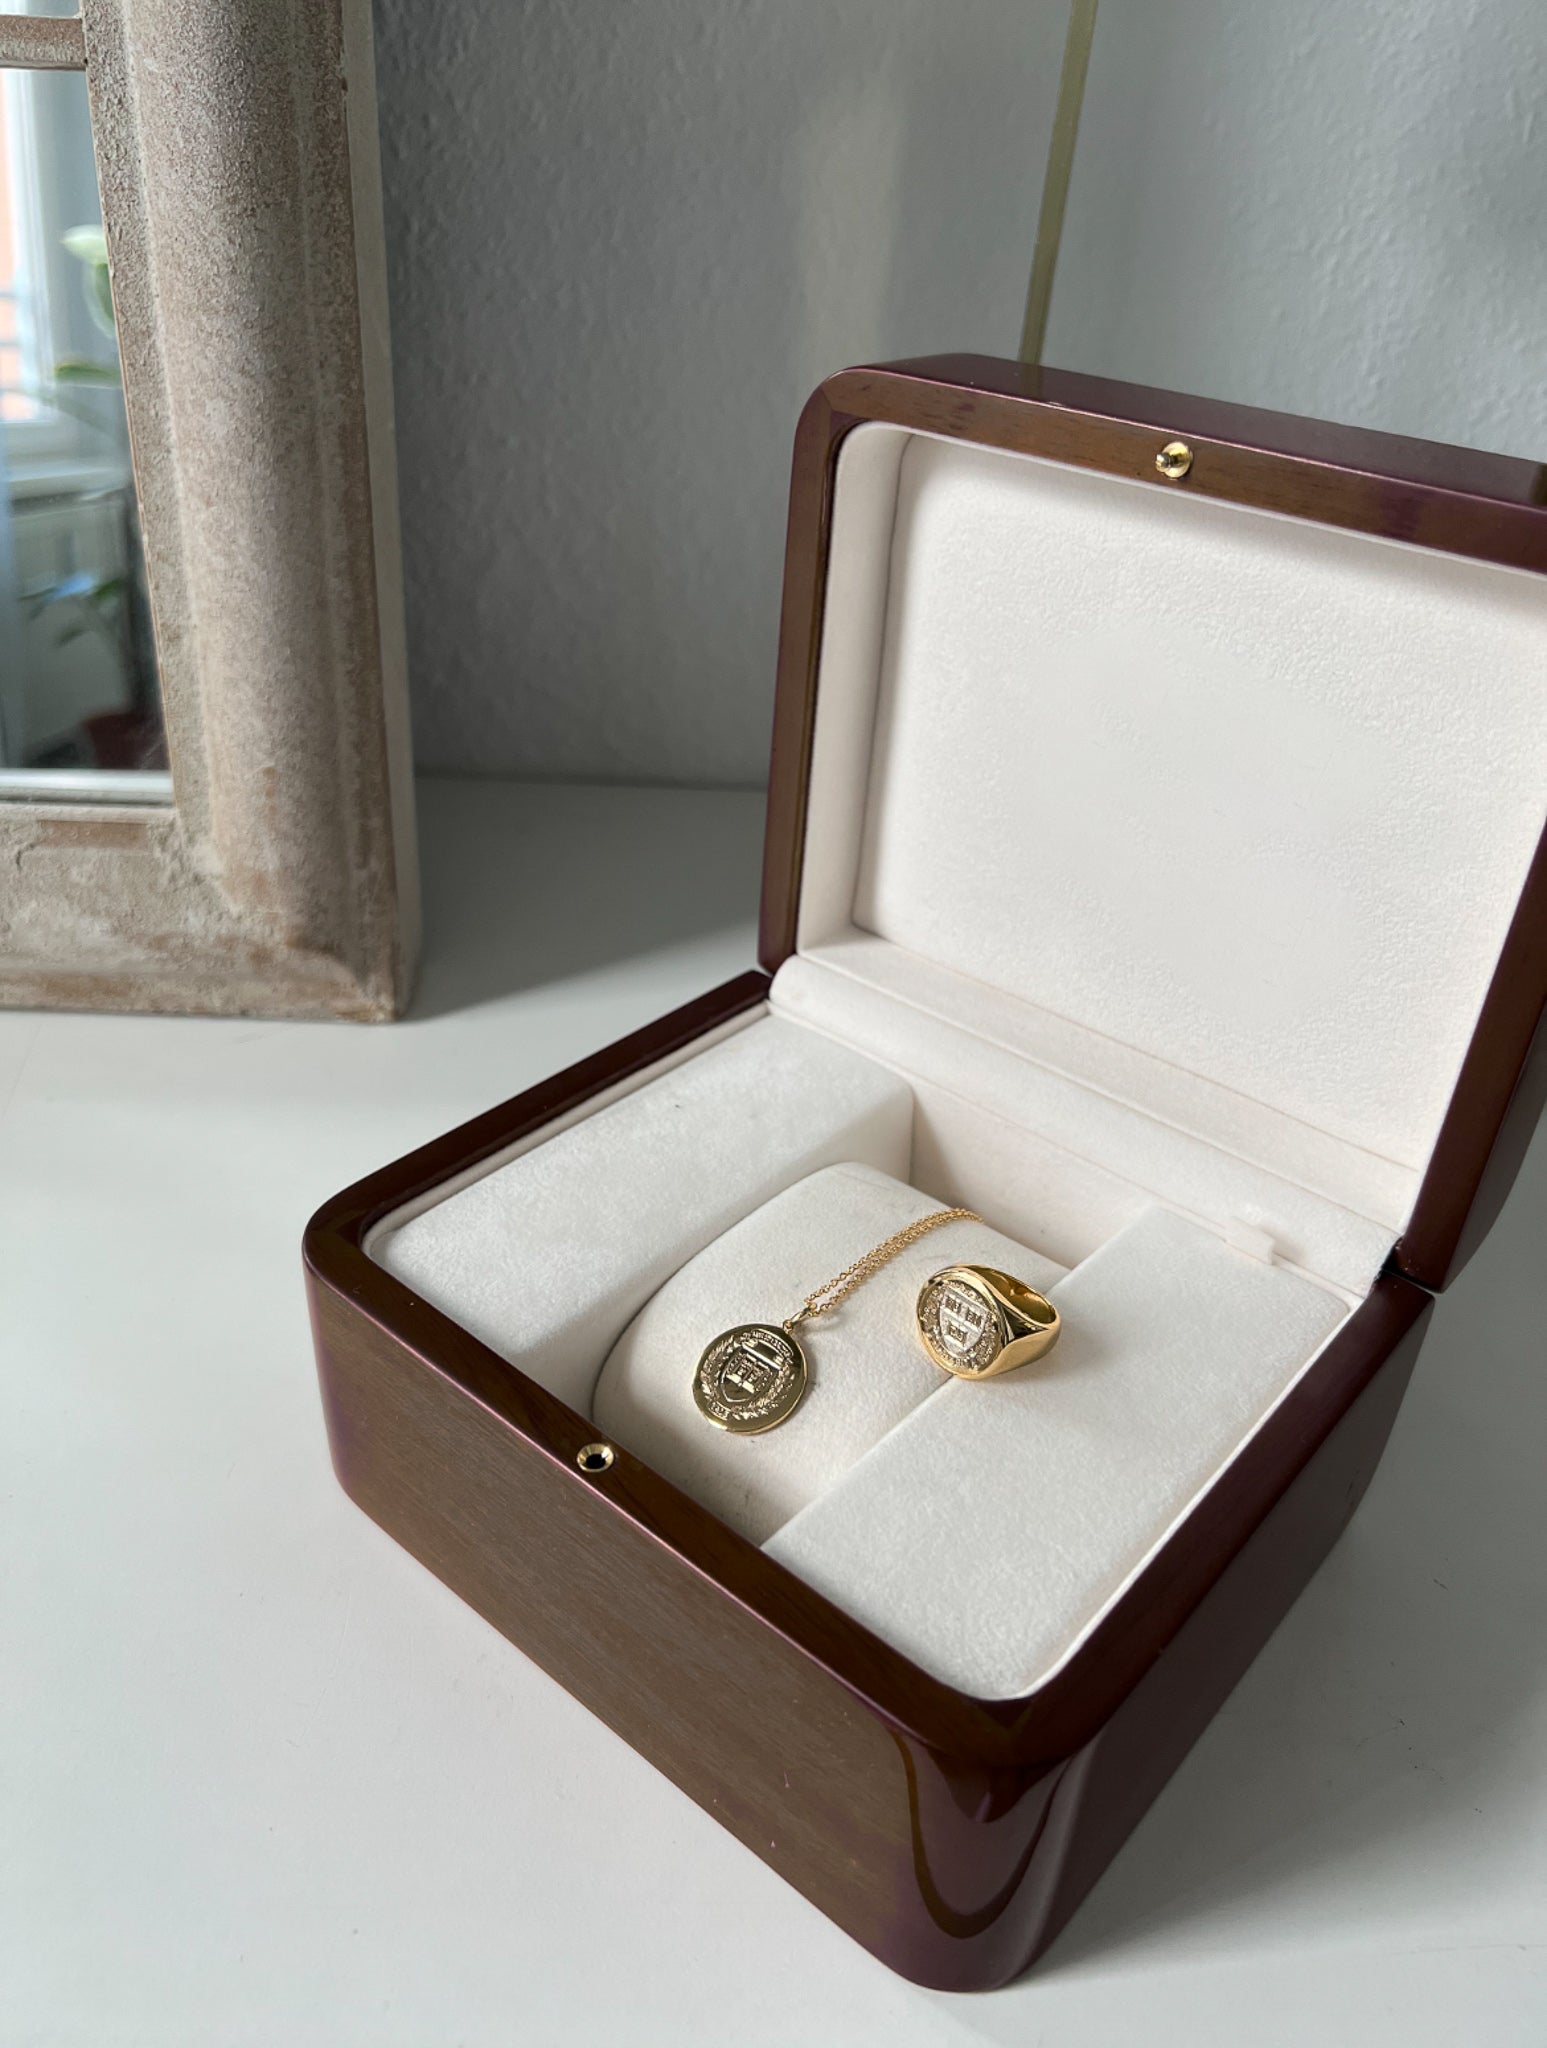 The Harvard Statement Class Ring beautifully displayed in a jewelry box, highlighting its stunning details and superior quality.